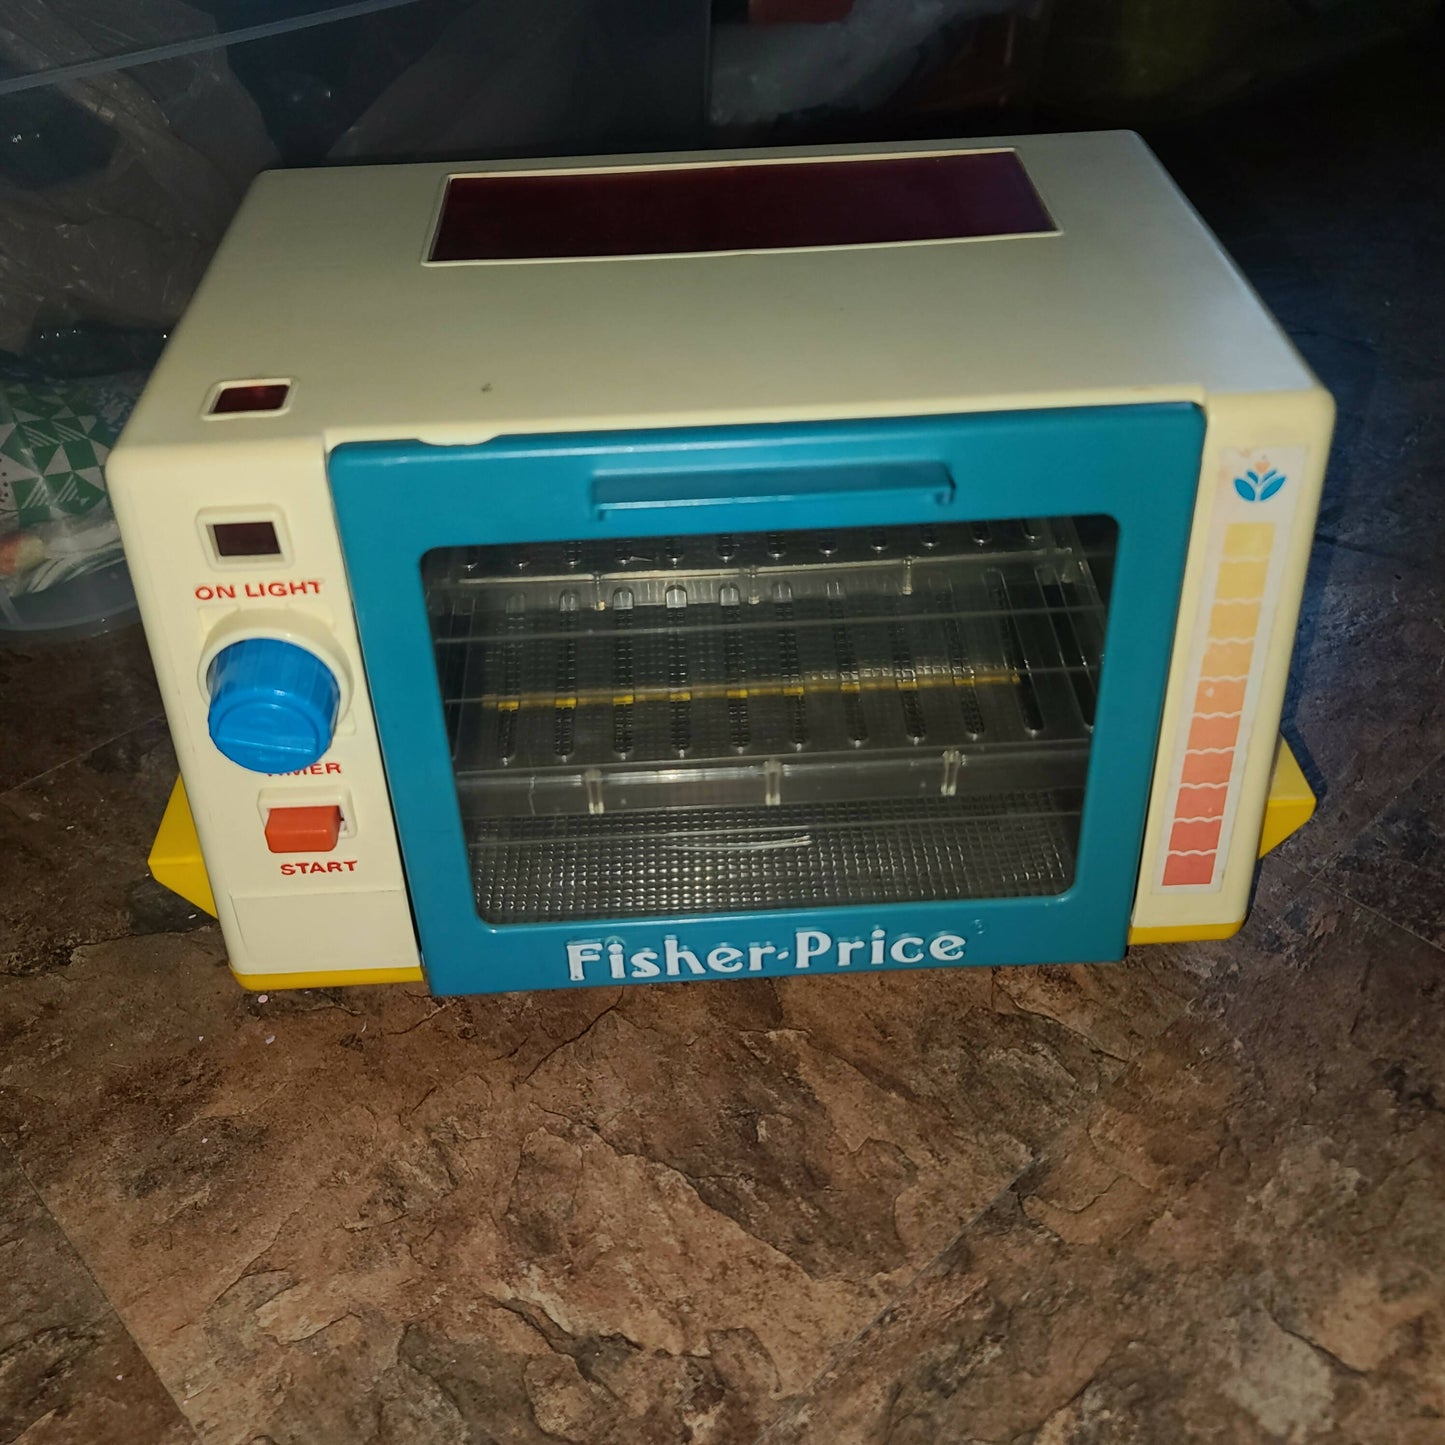 1987 Fisher-Price Toaster Oven